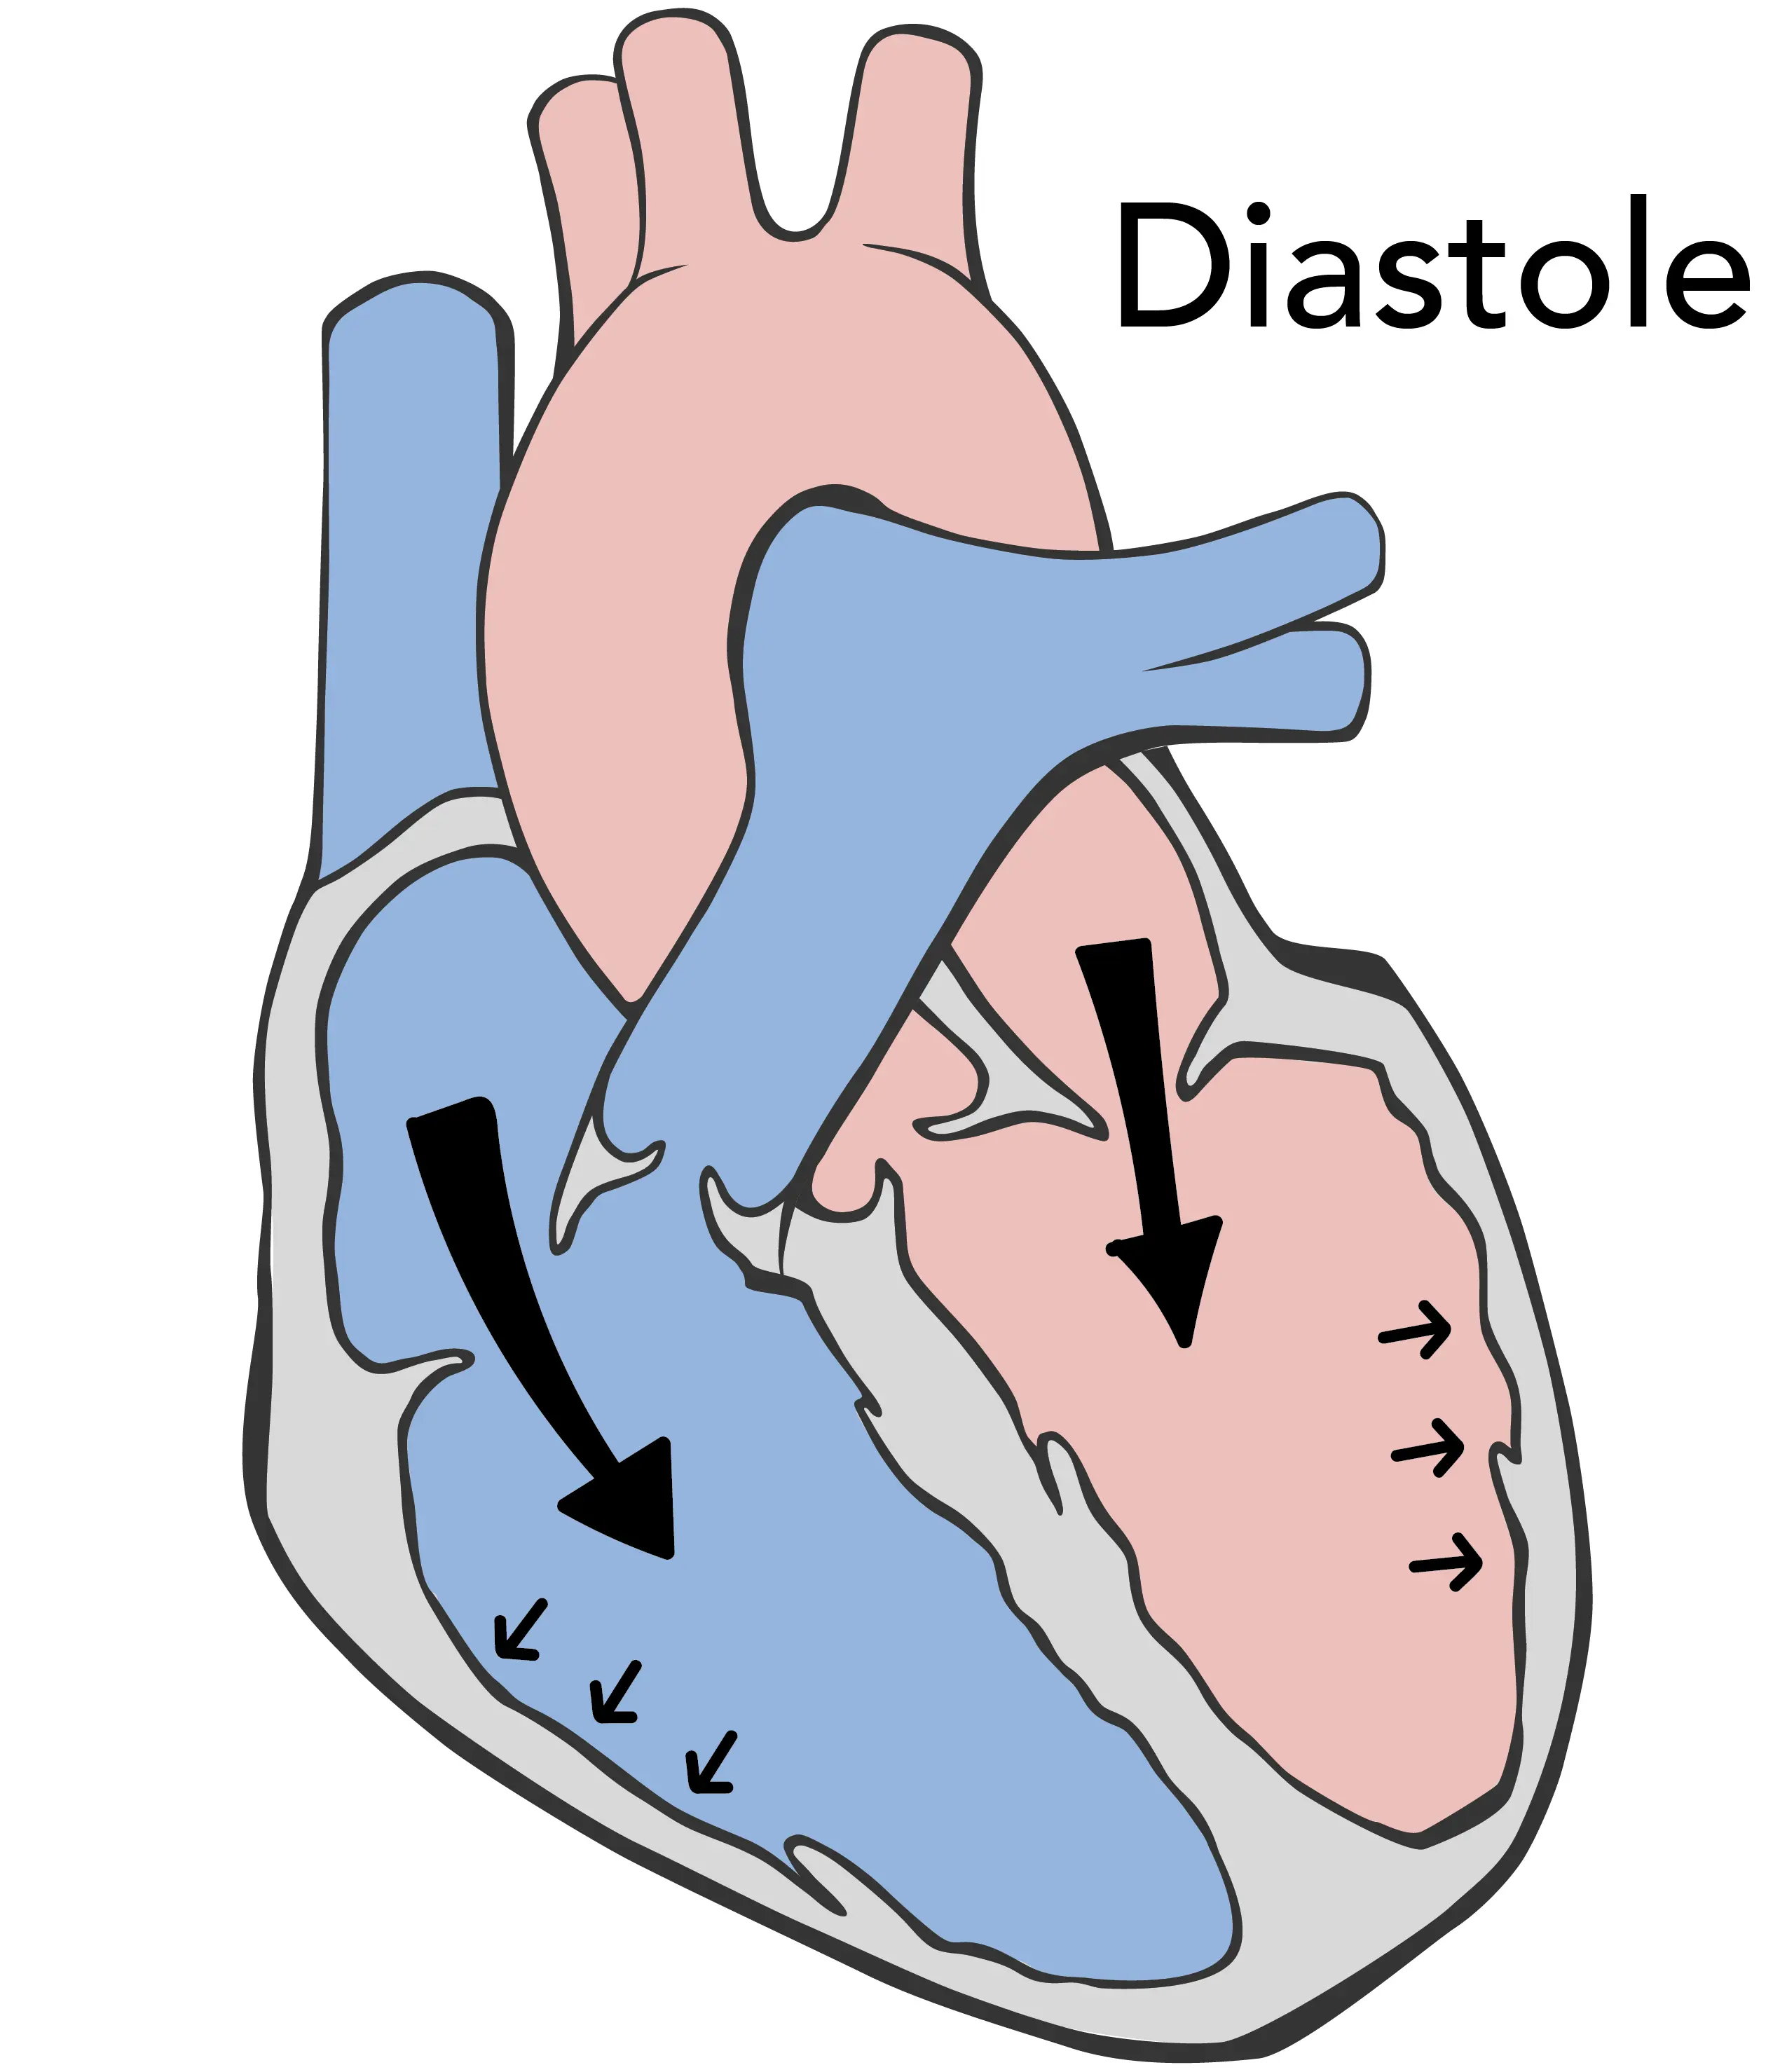 During the diastole phase the heart muscle relaxes, the heart chambers expand and blood flows into the heart.